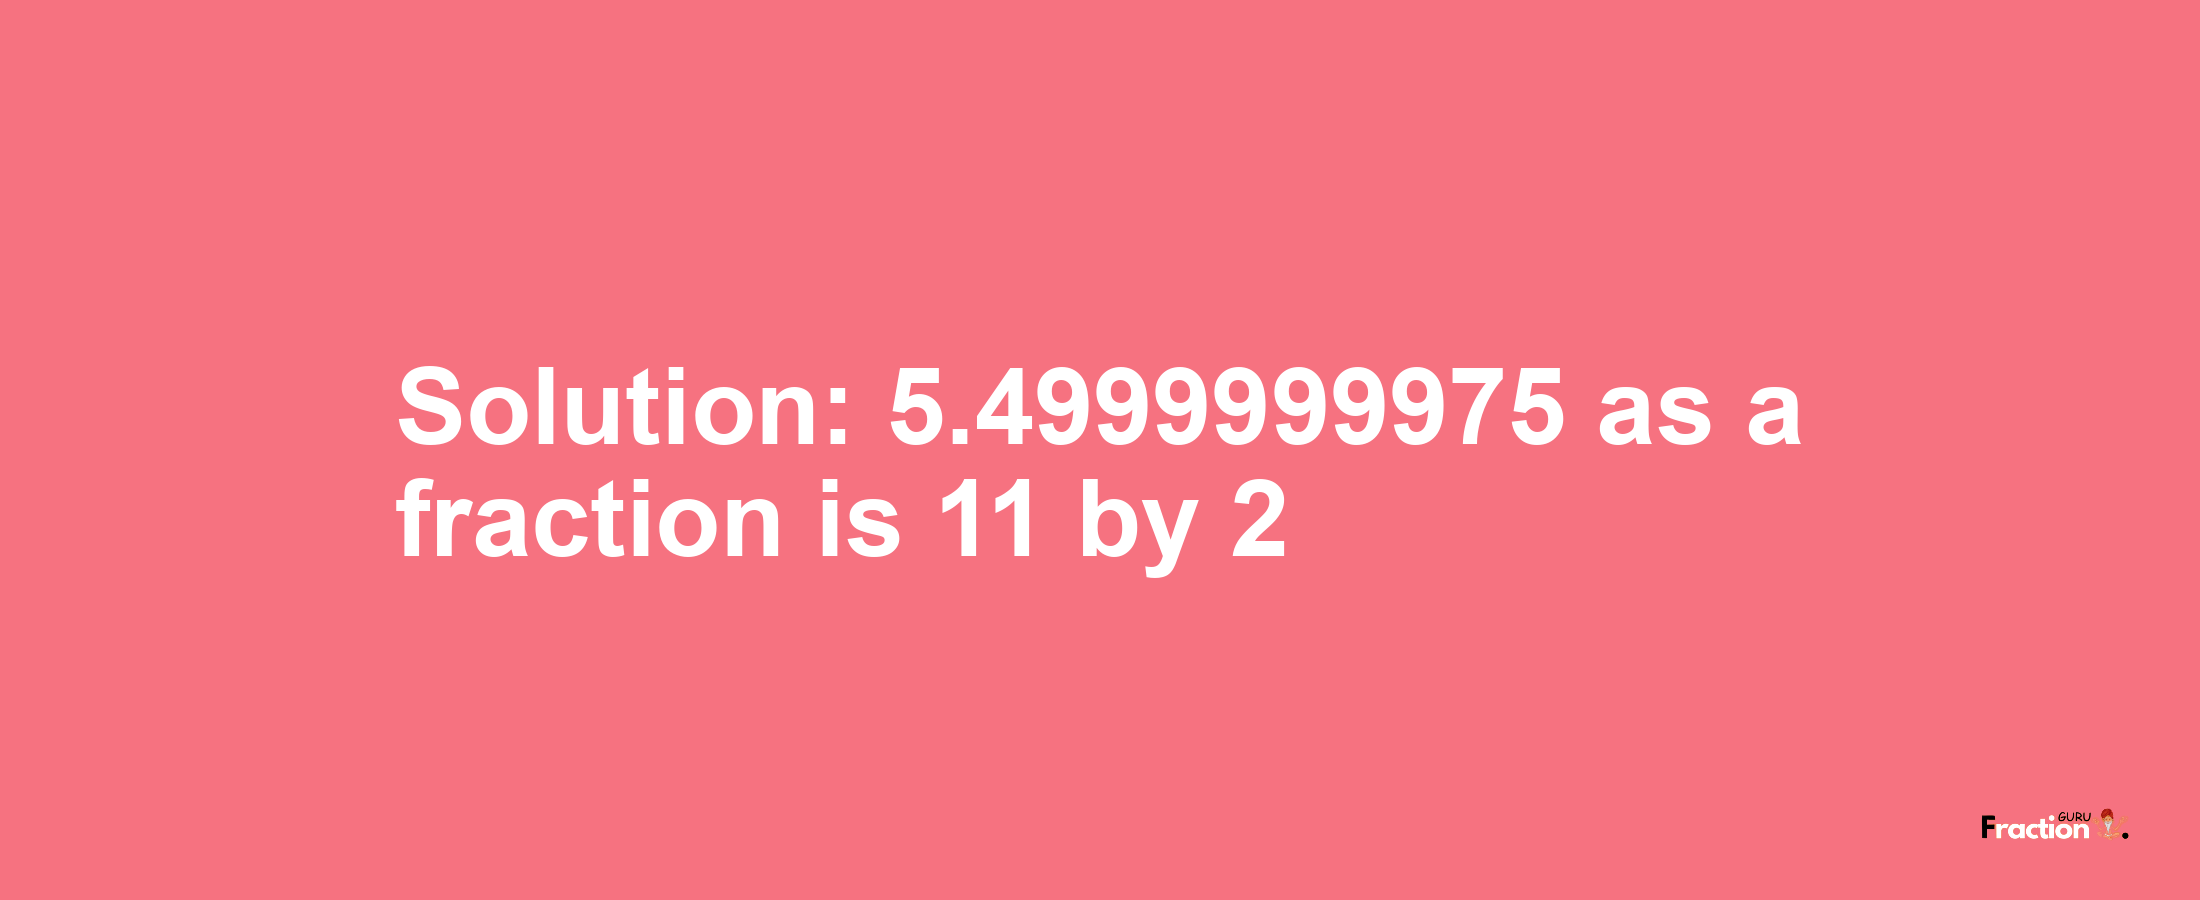 Solution:5.4999999975 as a fraction is 11/2